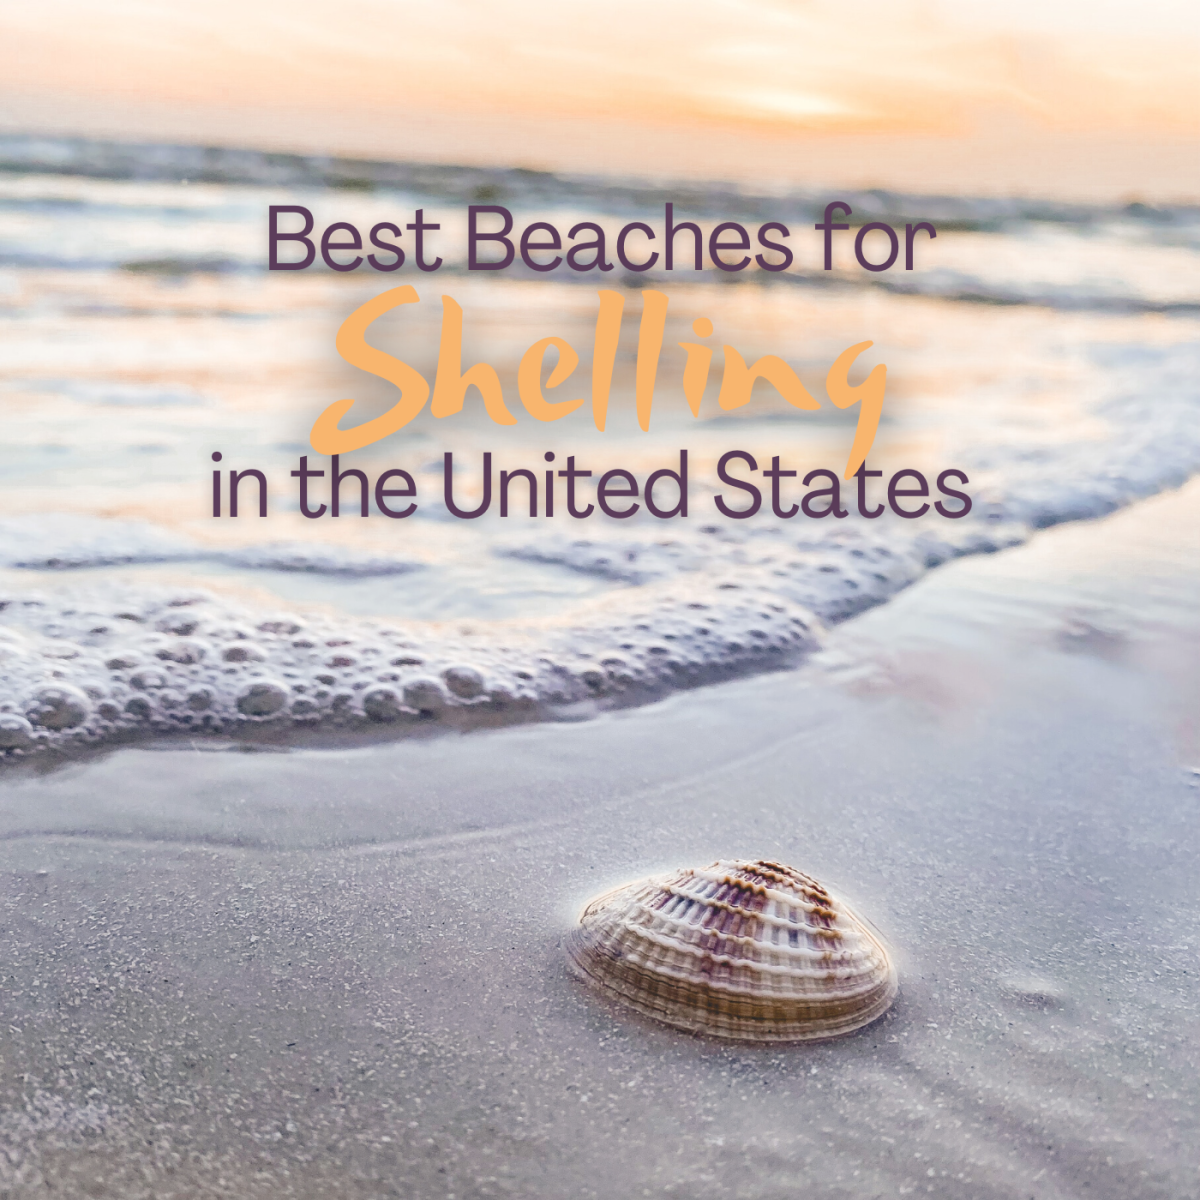 These are the best beaches in the United States for shelling. 